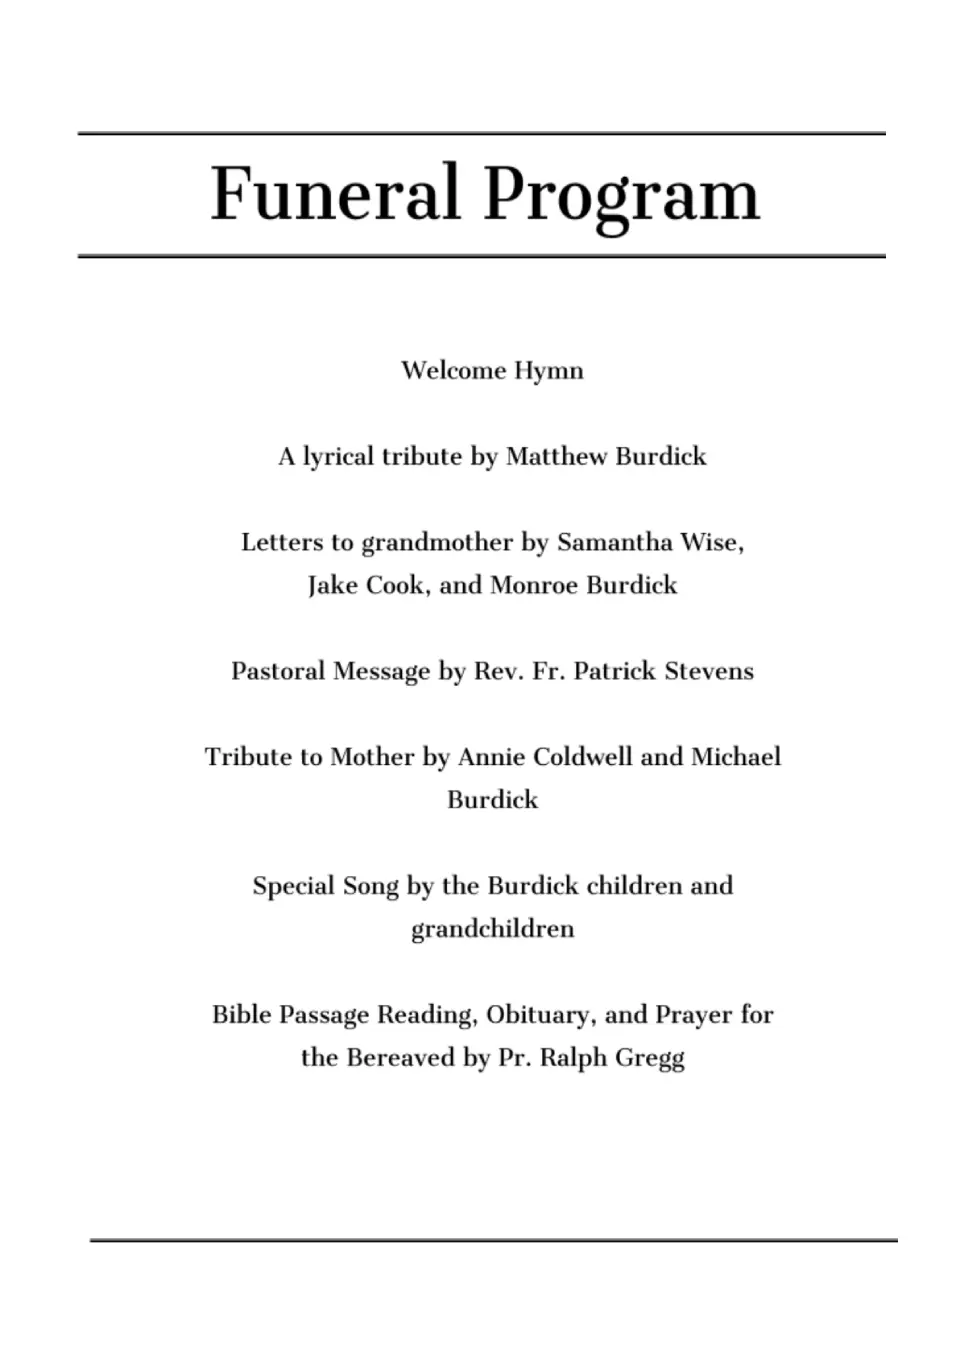 Funeral Program Template page 2 for Google Docs